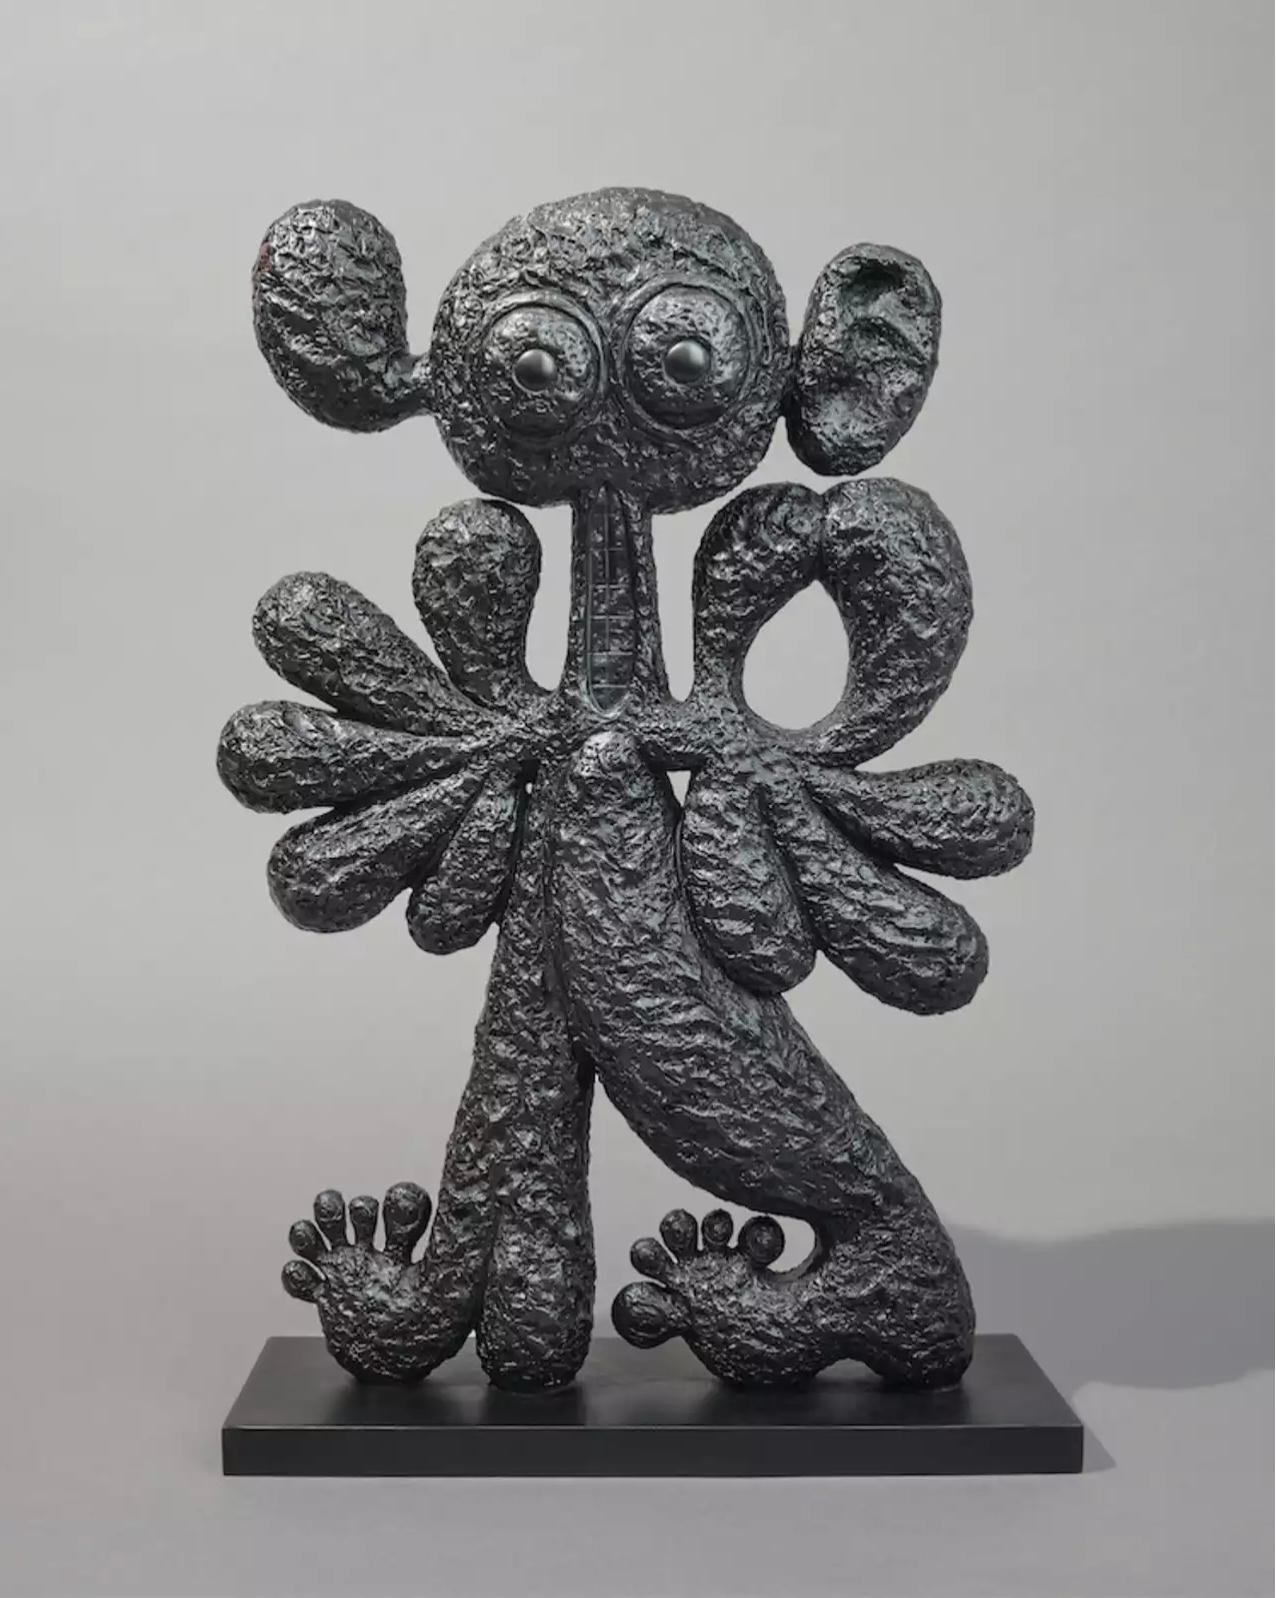 Artist: Baldur Helgason
Title: Huldufólk Black
Year: 2021
Edition: 24
Size:16 × 10 3/5 × 3 1/2 in
40.6 × 27 × 9 cm
Medium: Archaic Bronze

Note: This will be shipped from Japan so the buyer is responsible for all import fees and taxes in their